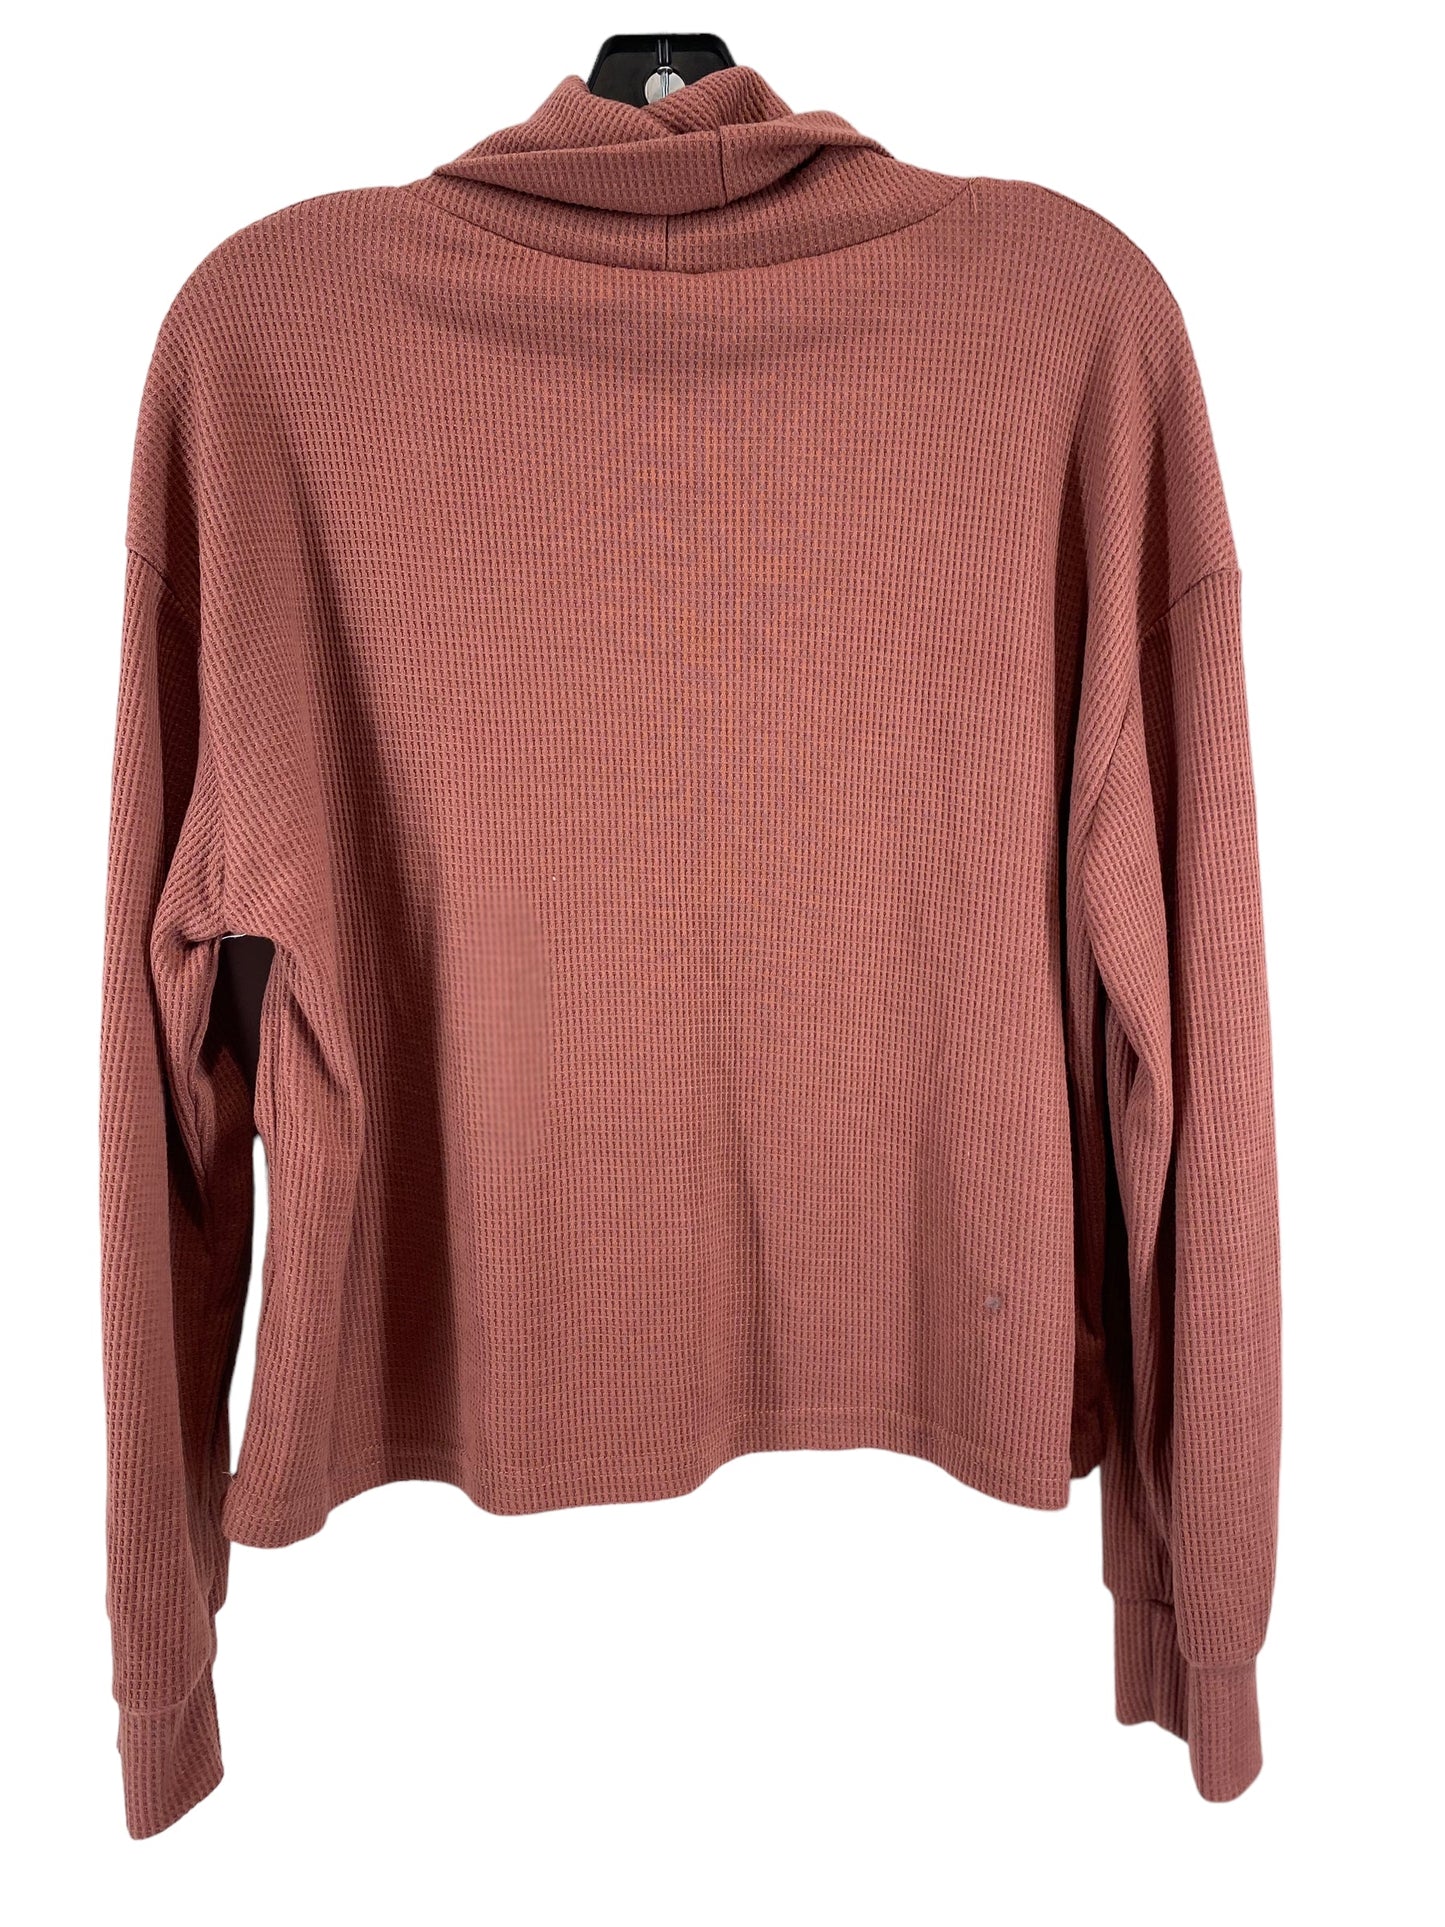 Top Long Sleeve Basic By Shein  Size: L